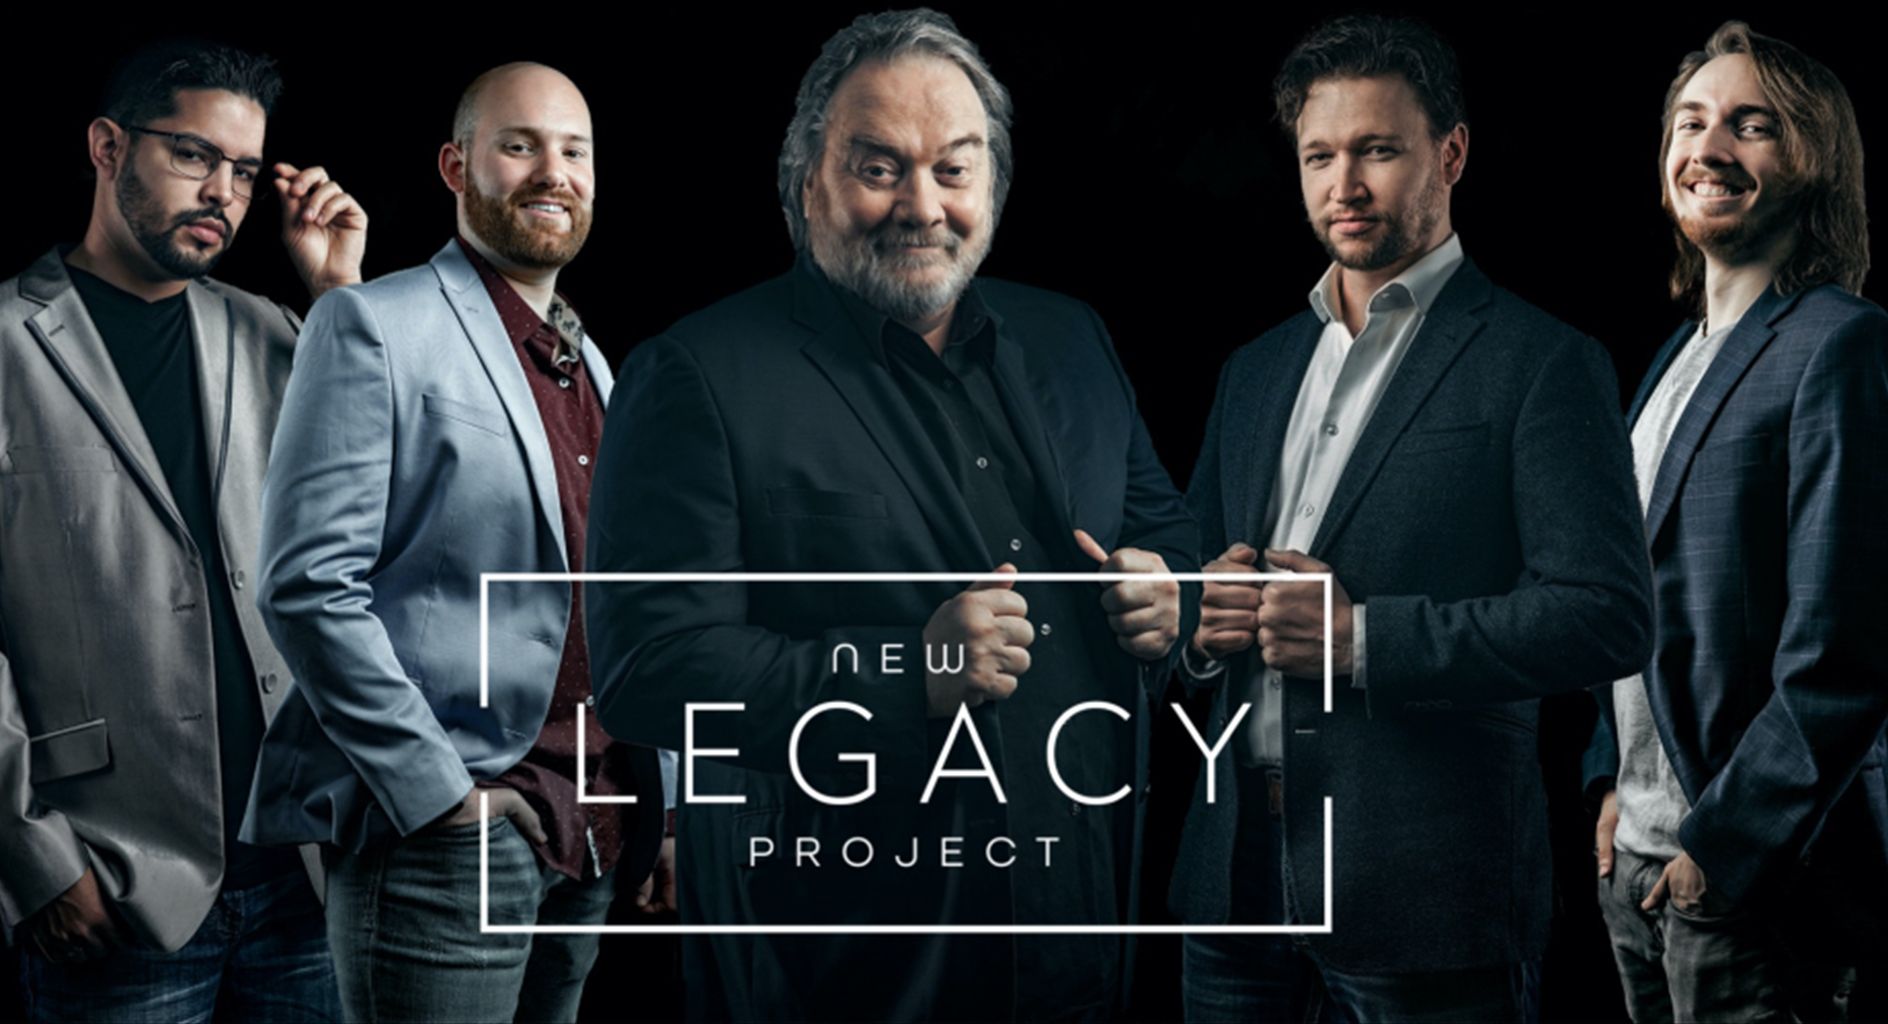 Popular Nashville Quartet, New Legacy Project, Live and In Person at Trinity Lutheran Church in Hobbs, Hobbs, New Mexico, United States